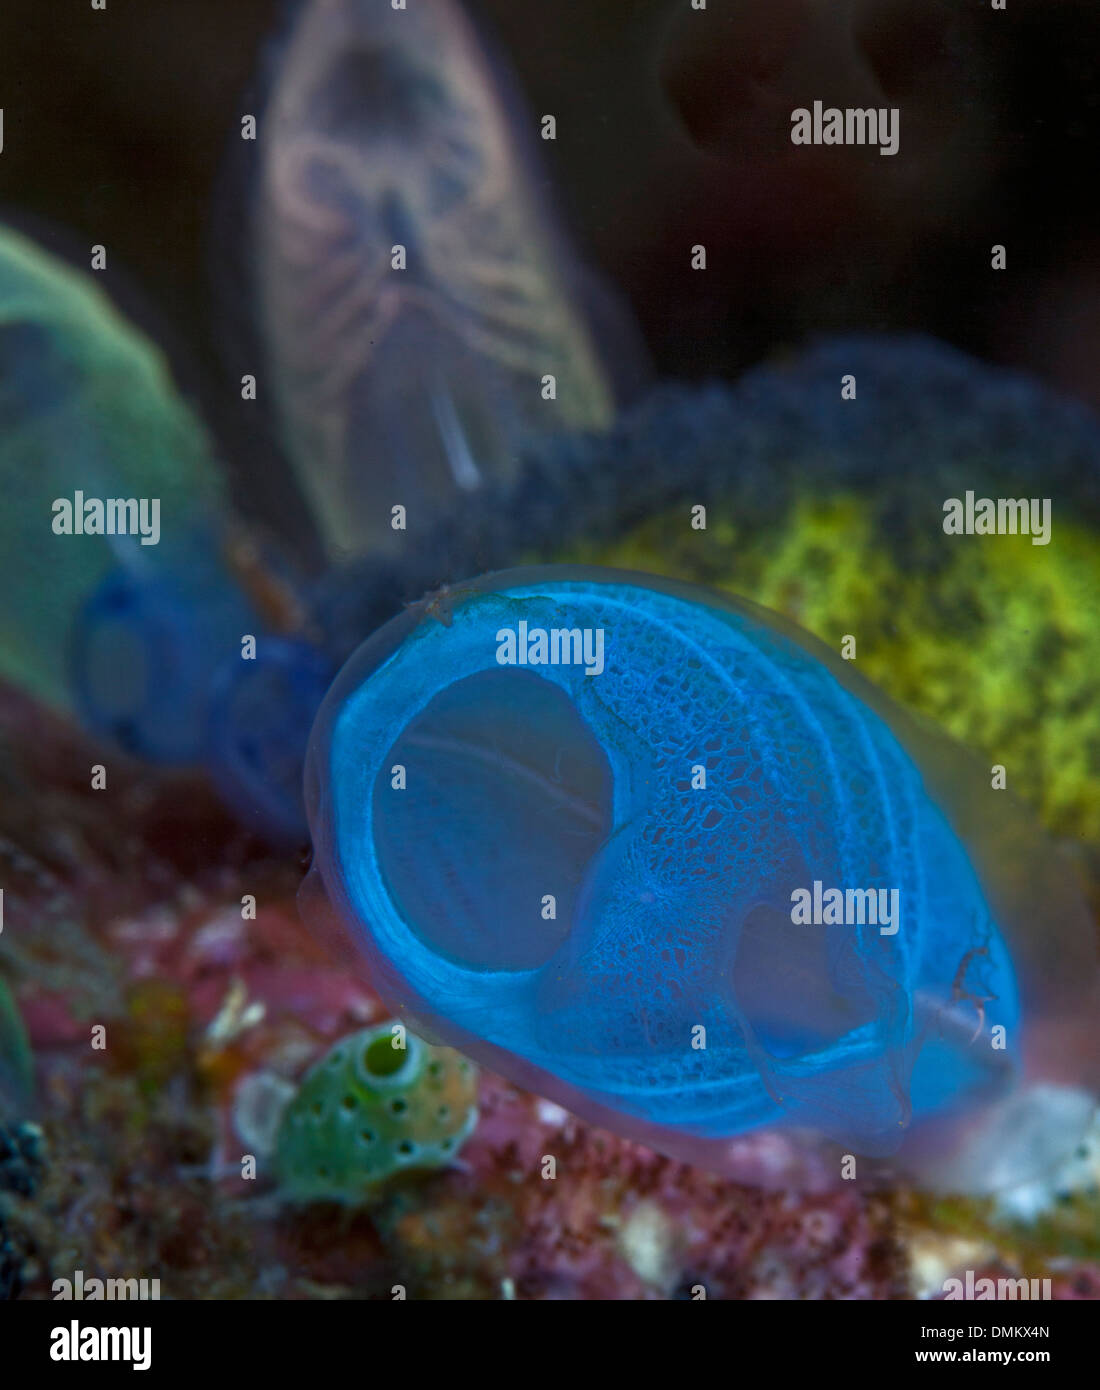 Fluorescent tunicates, bright blue in the foreground glowing pink and yellow in the background. Lembeh Straits, Indonesia. Stock Photo